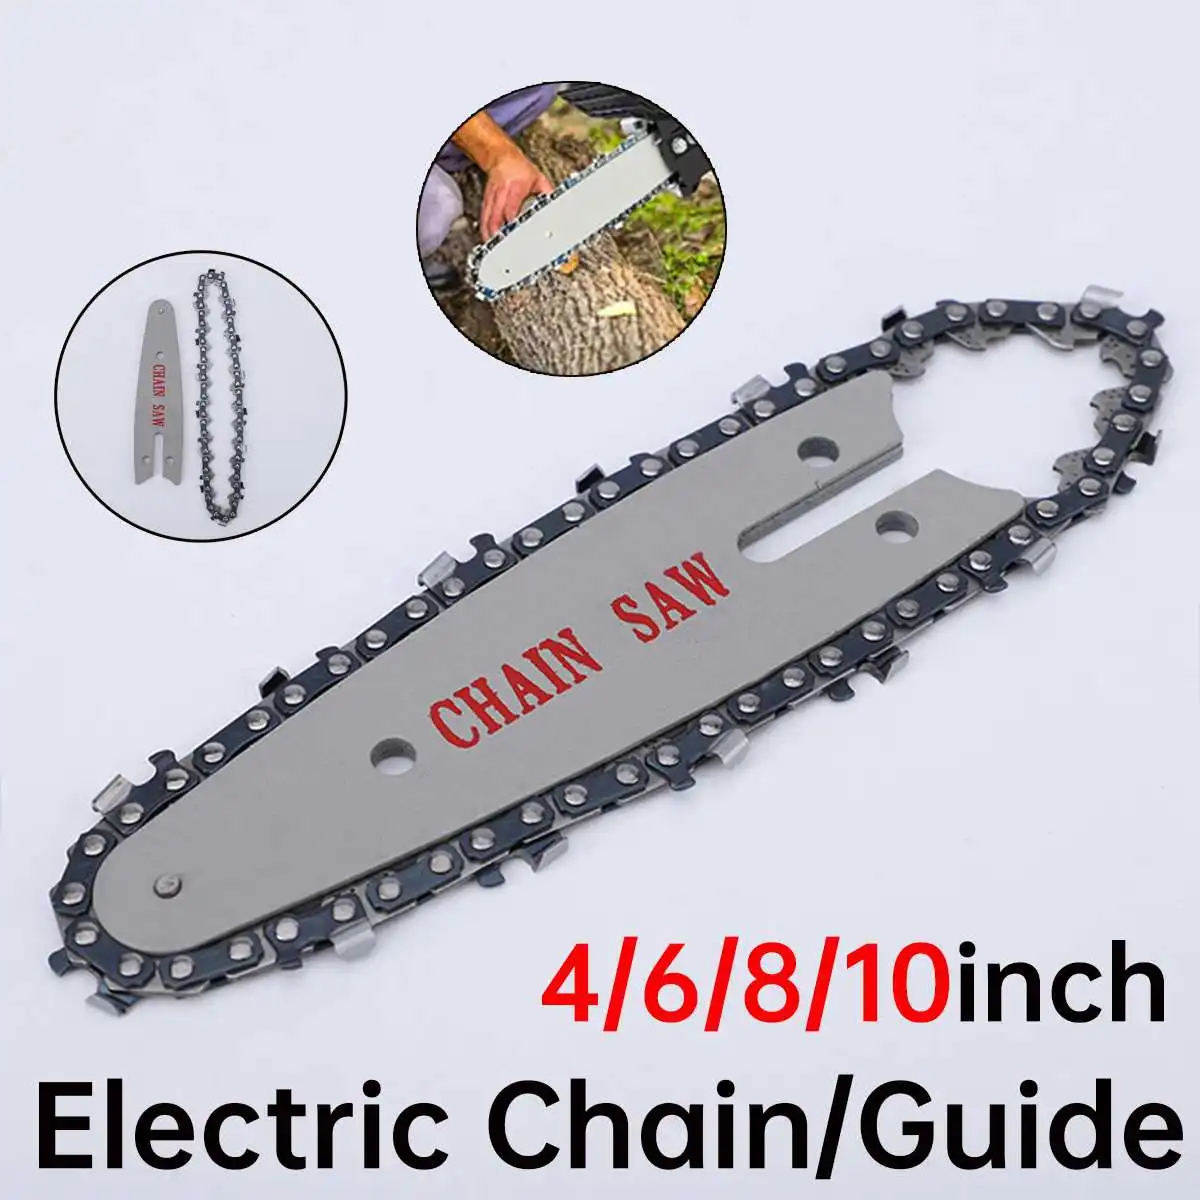 

4/6/8/10 inch Electric Saw Chain Guide Electric Chainsaw Guide Chains Used For Logging Pruning Saw Chain Accessories Tools